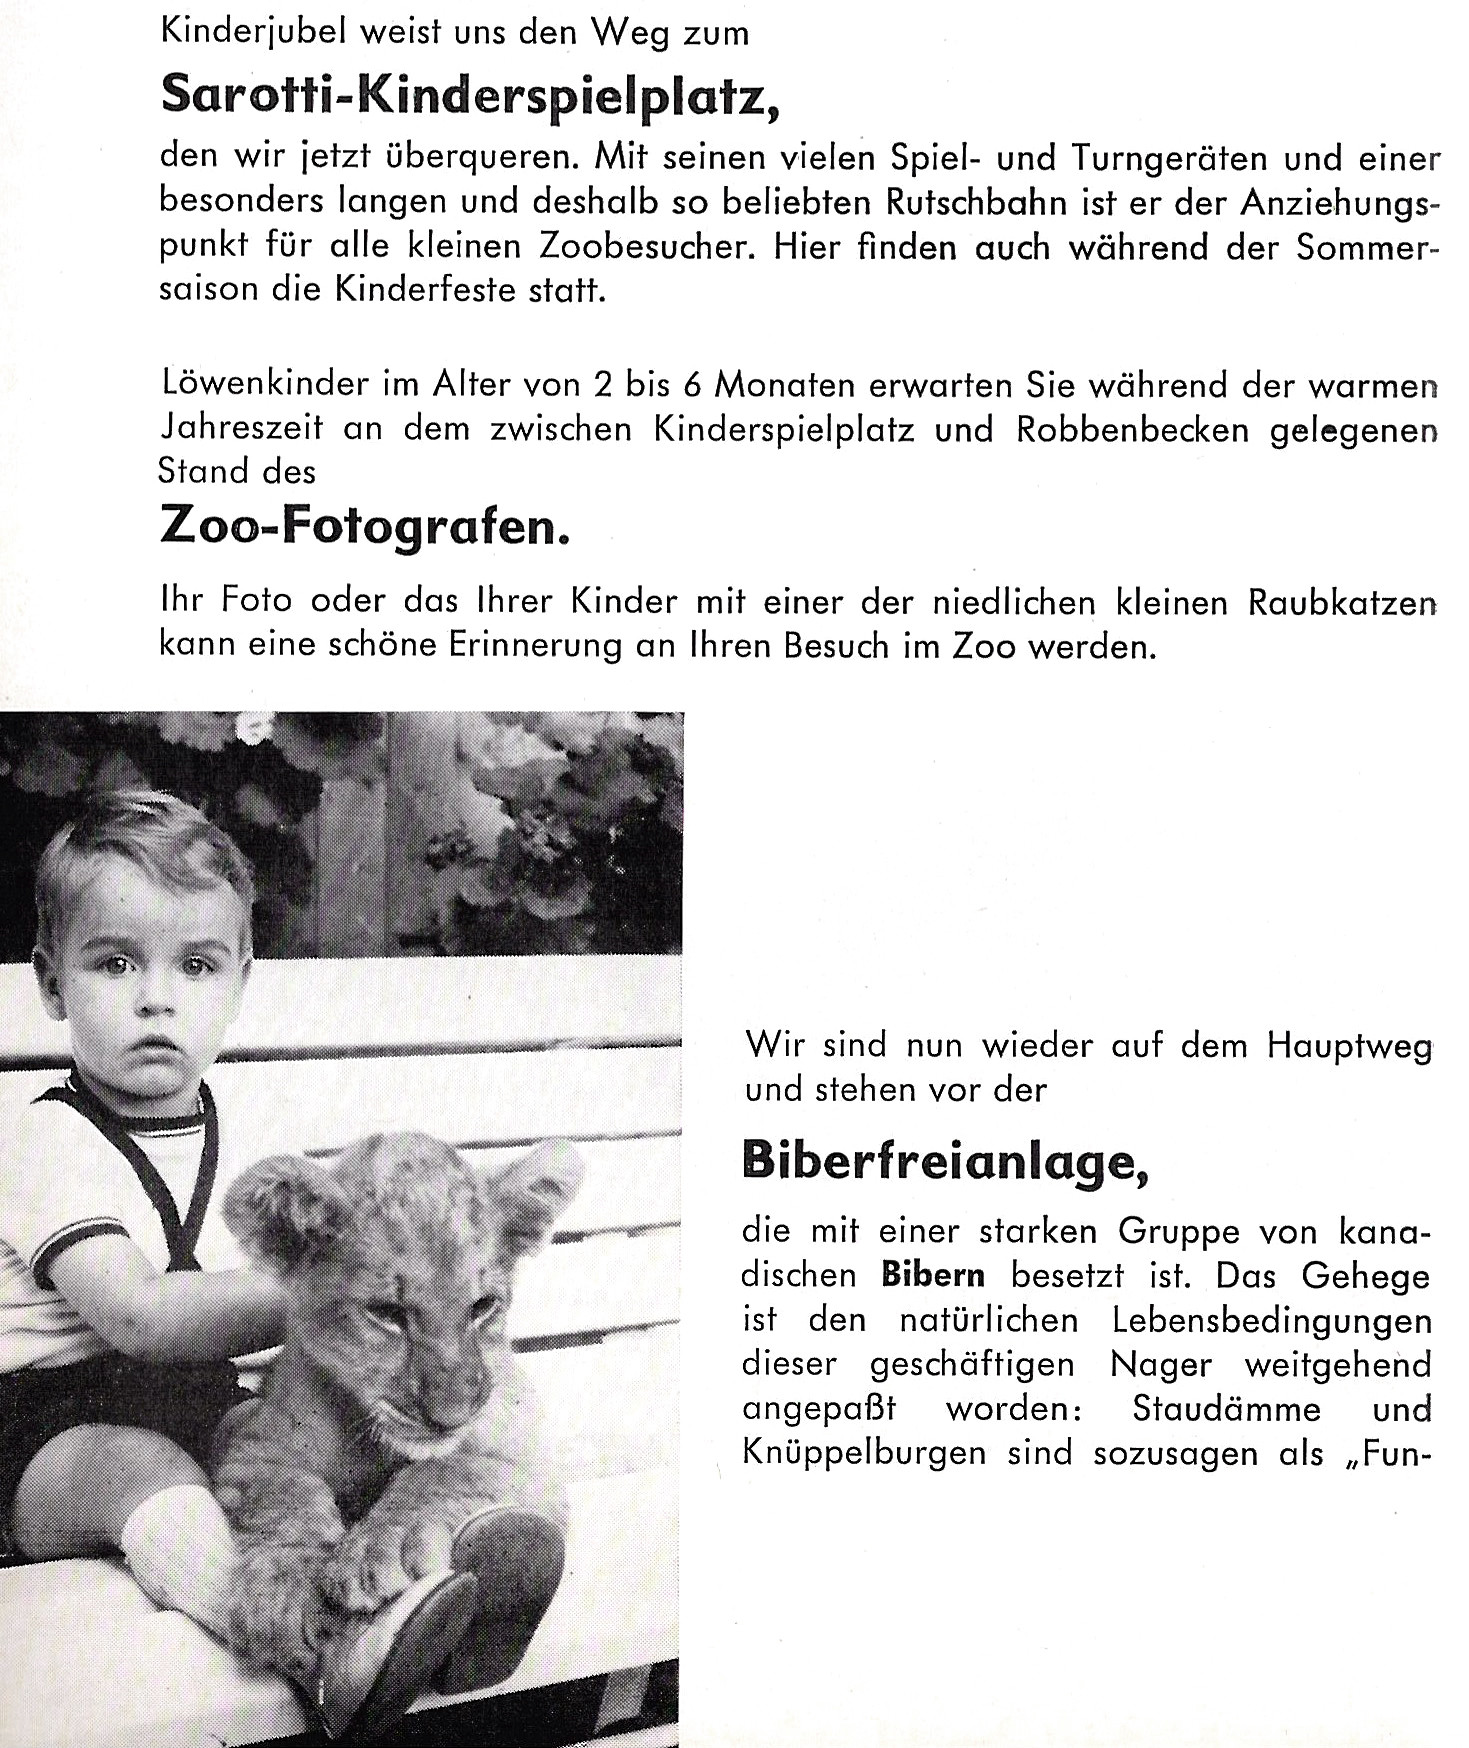 A page from the 1971 zoo guide, which calls attention to the zoo photographer's booth and displays a photo of a toddler with a lion cub on his lap.